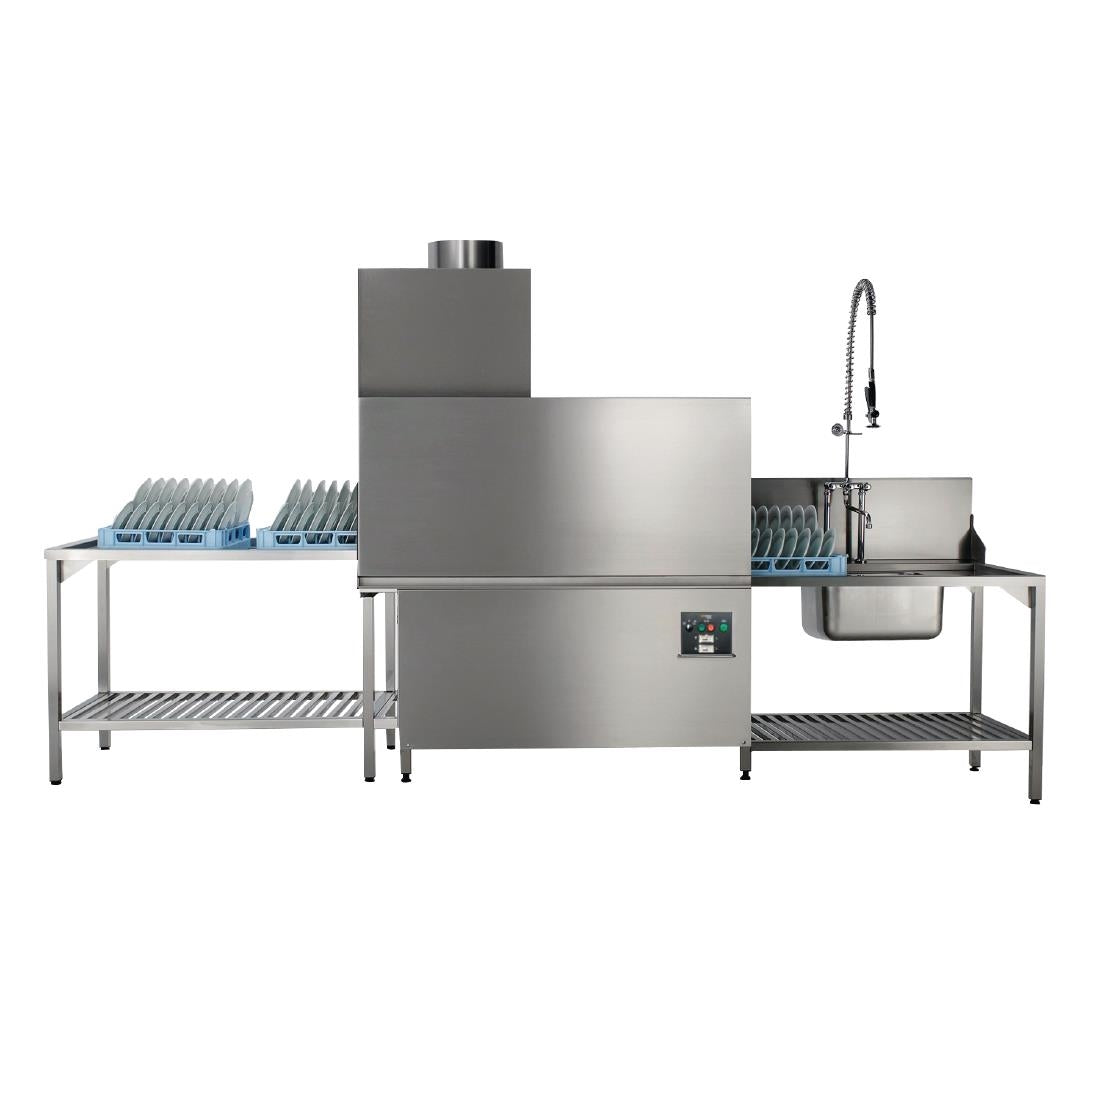 Hobart Ecomax Plus Conveyor Dishwasher Hot Feed C815-A JD Catering Equipment Solutions Ltd